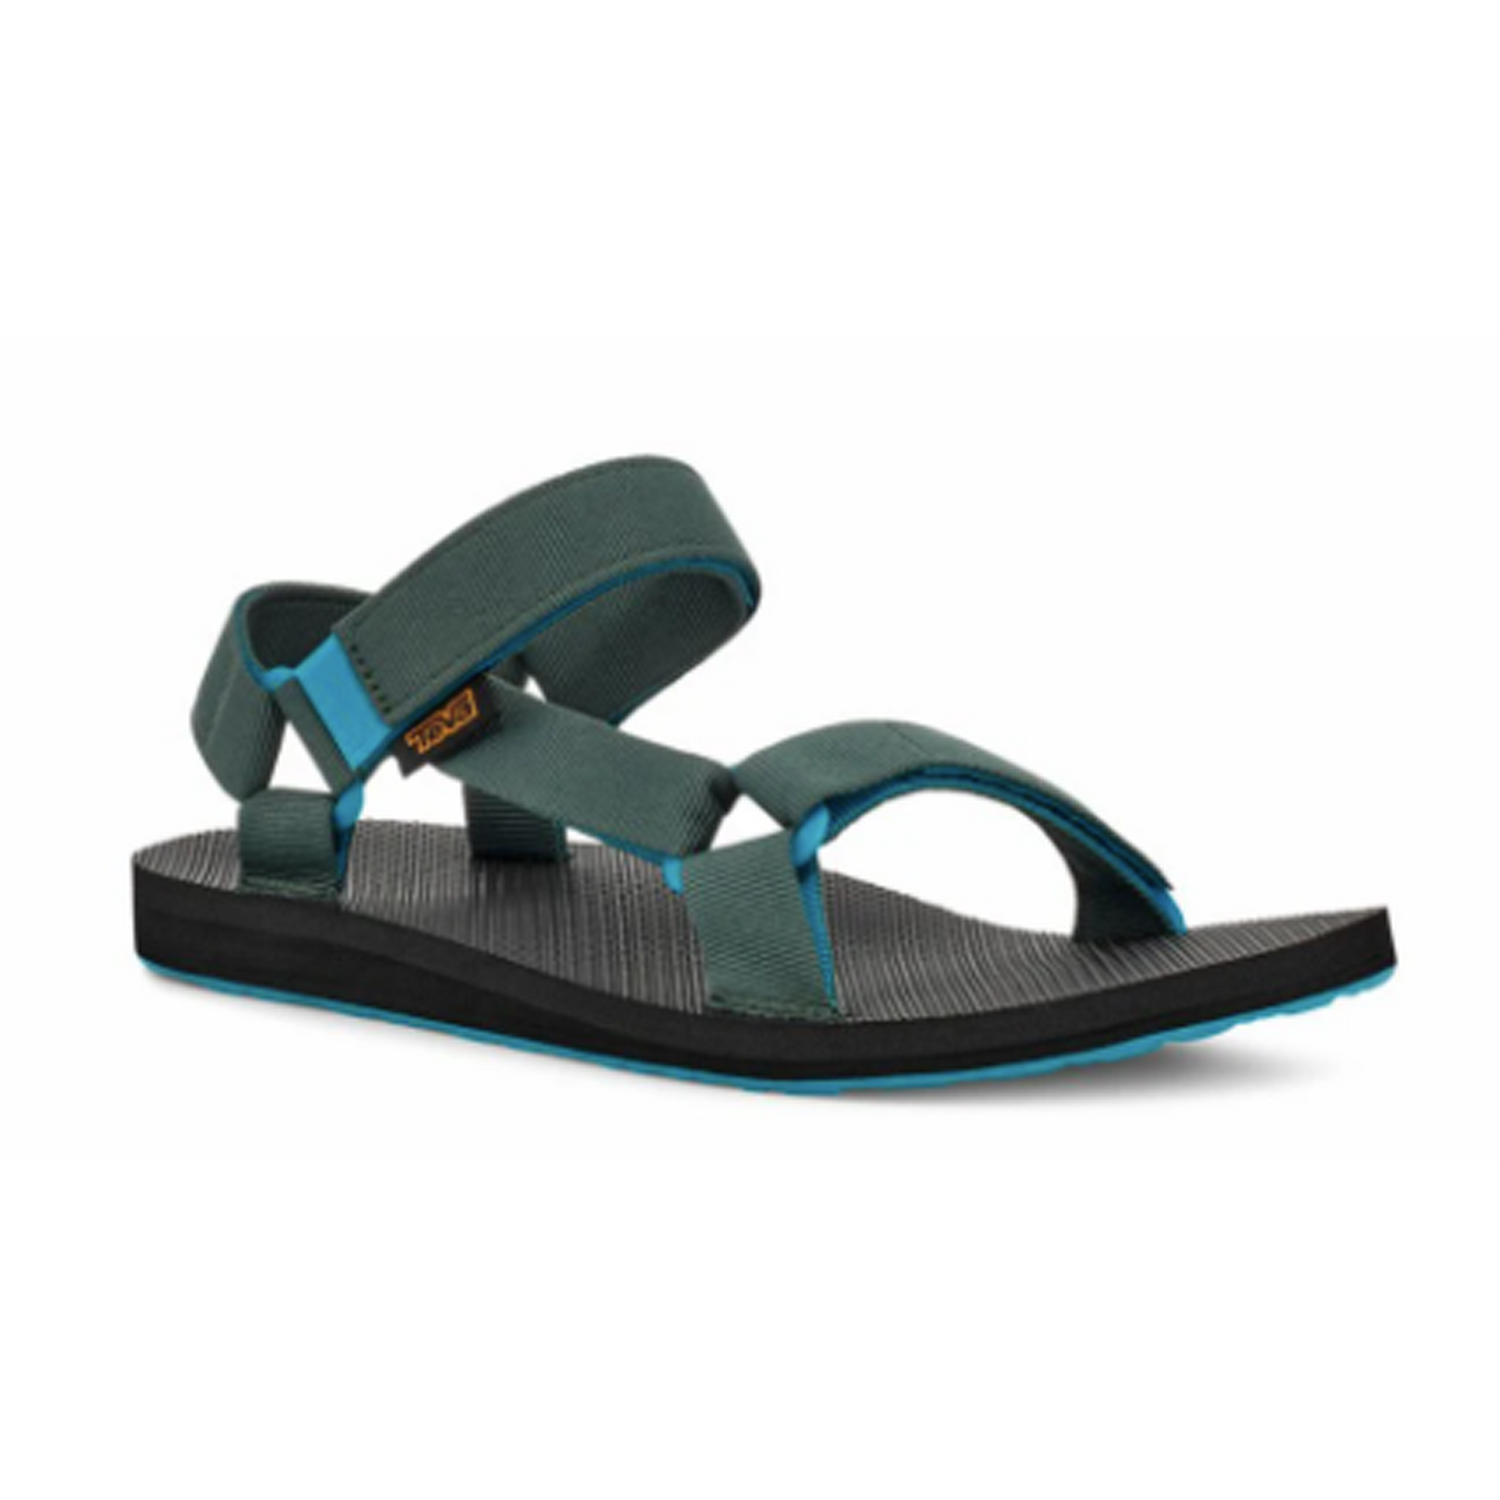 Men's Original Universal Sandal in colours green and blue.